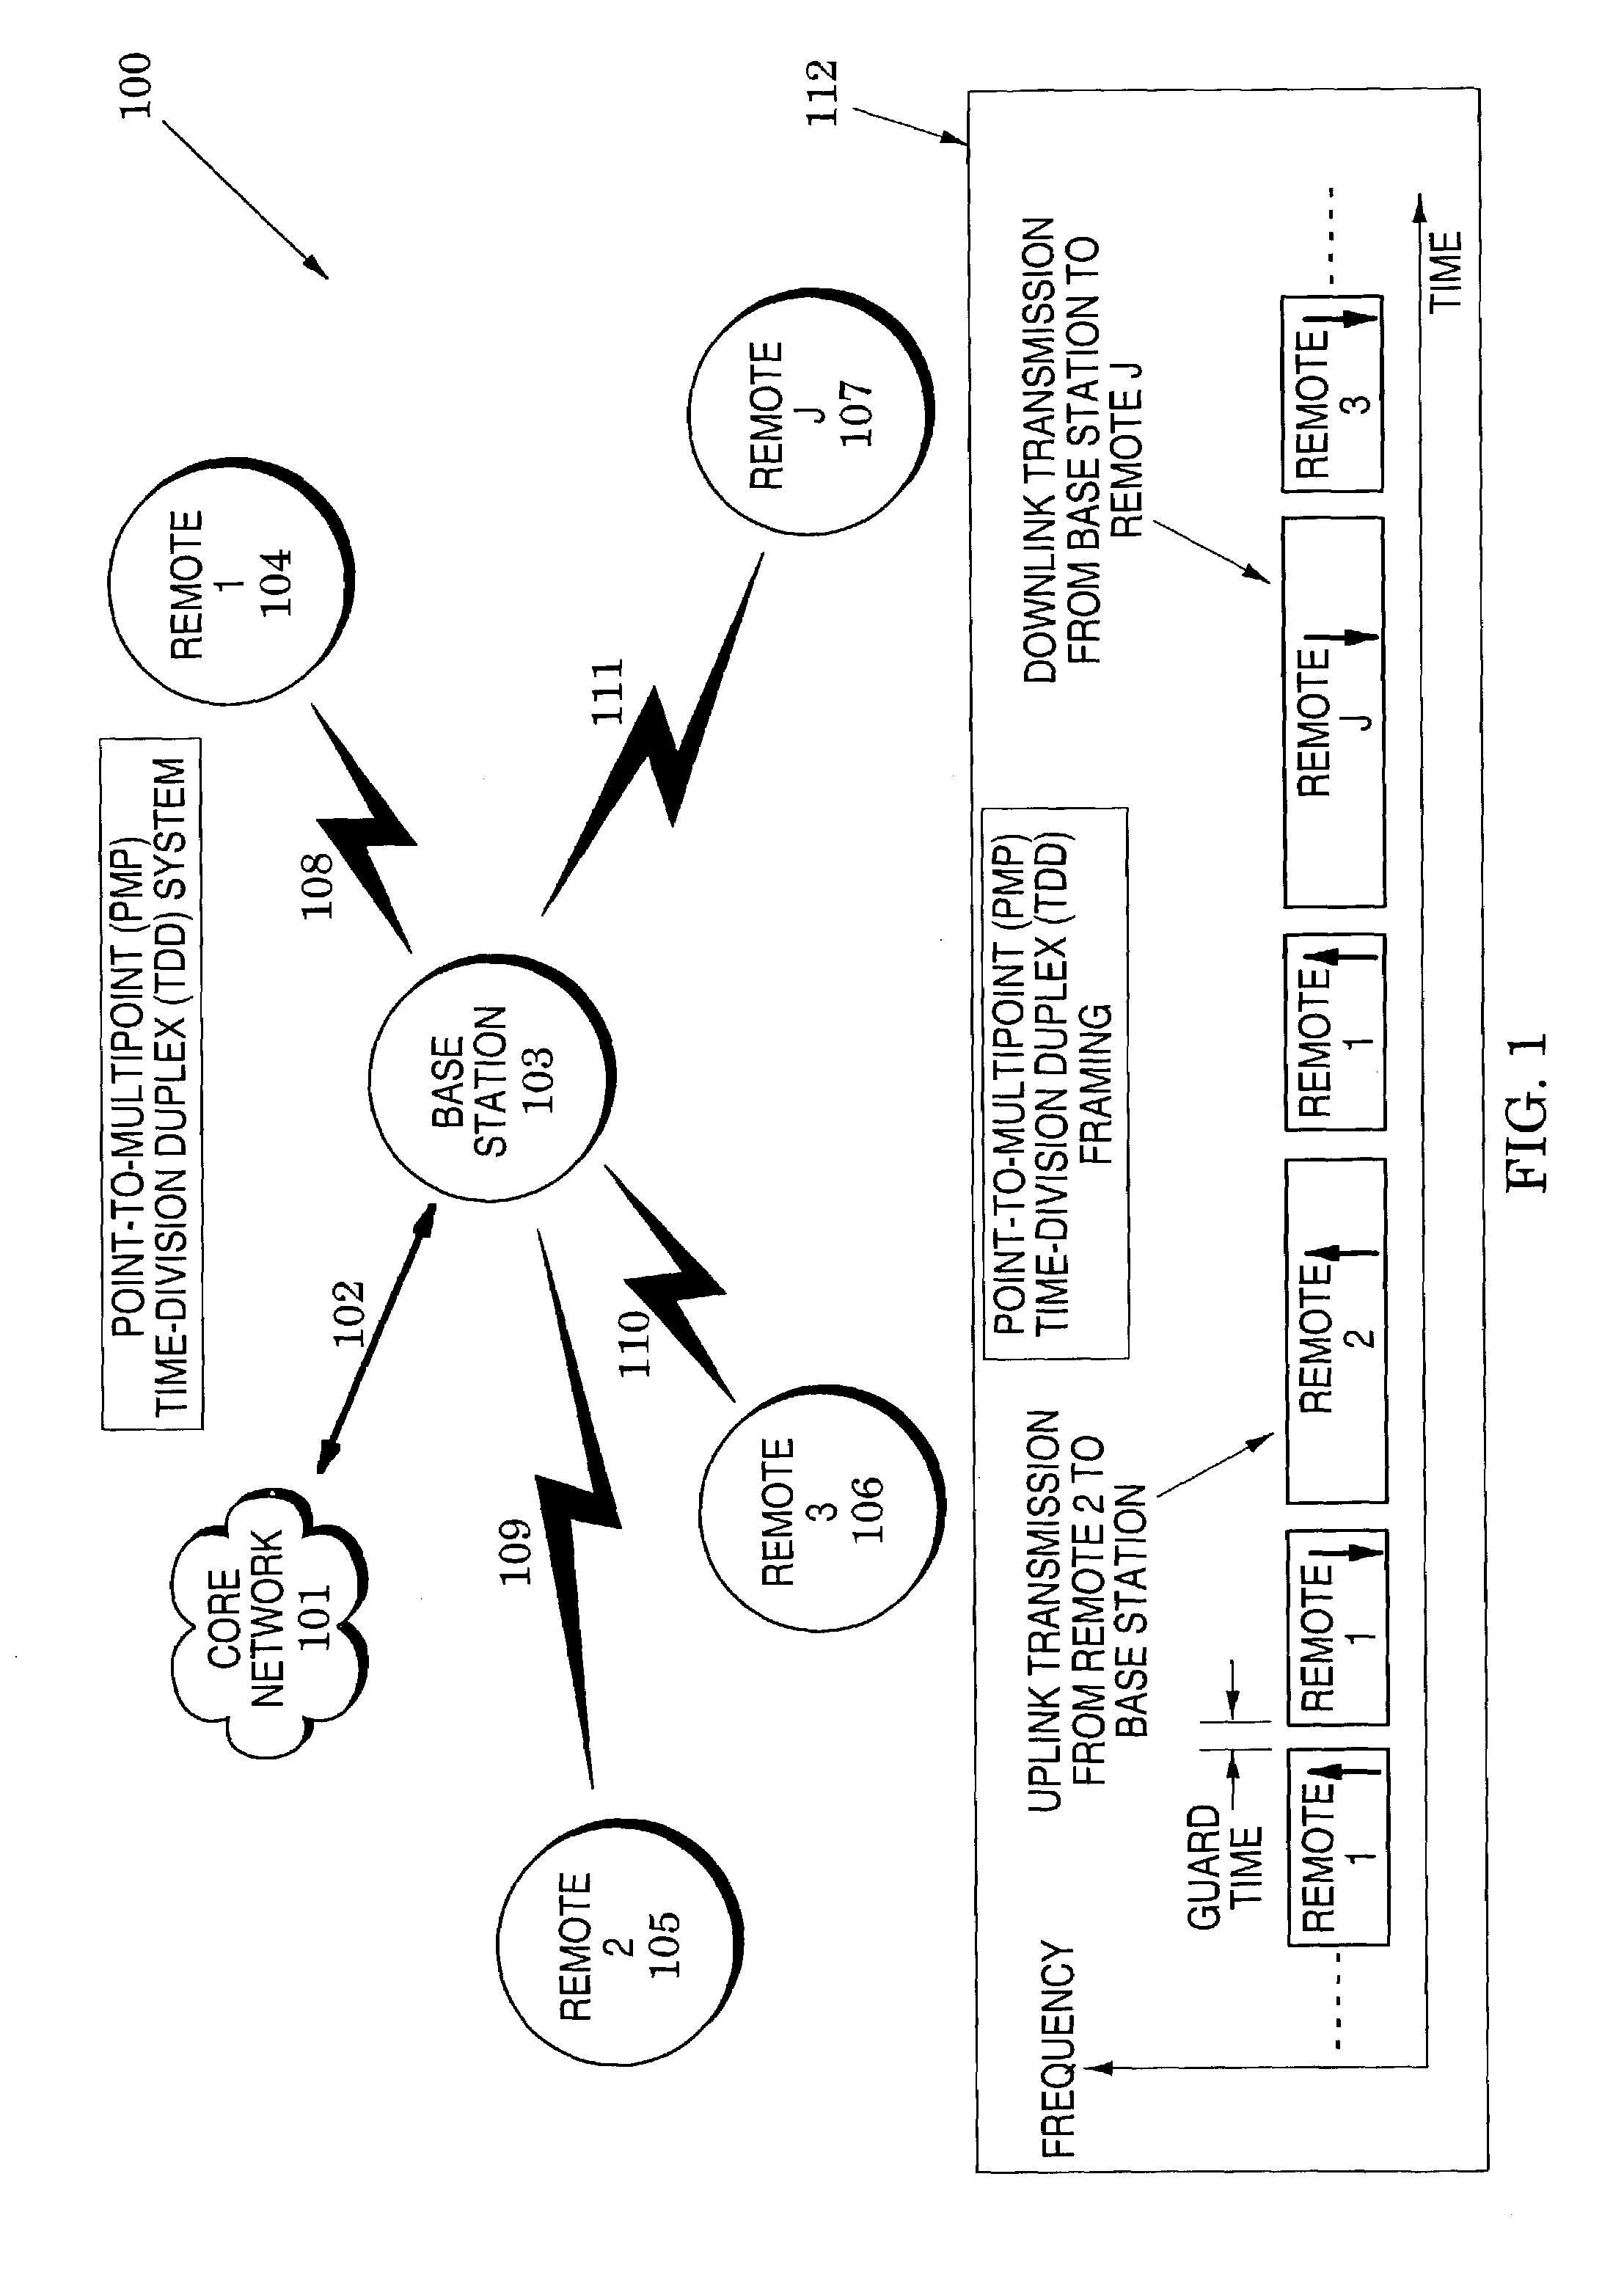 Wireless communications structures and methods utilizing frequency domain spatial processing